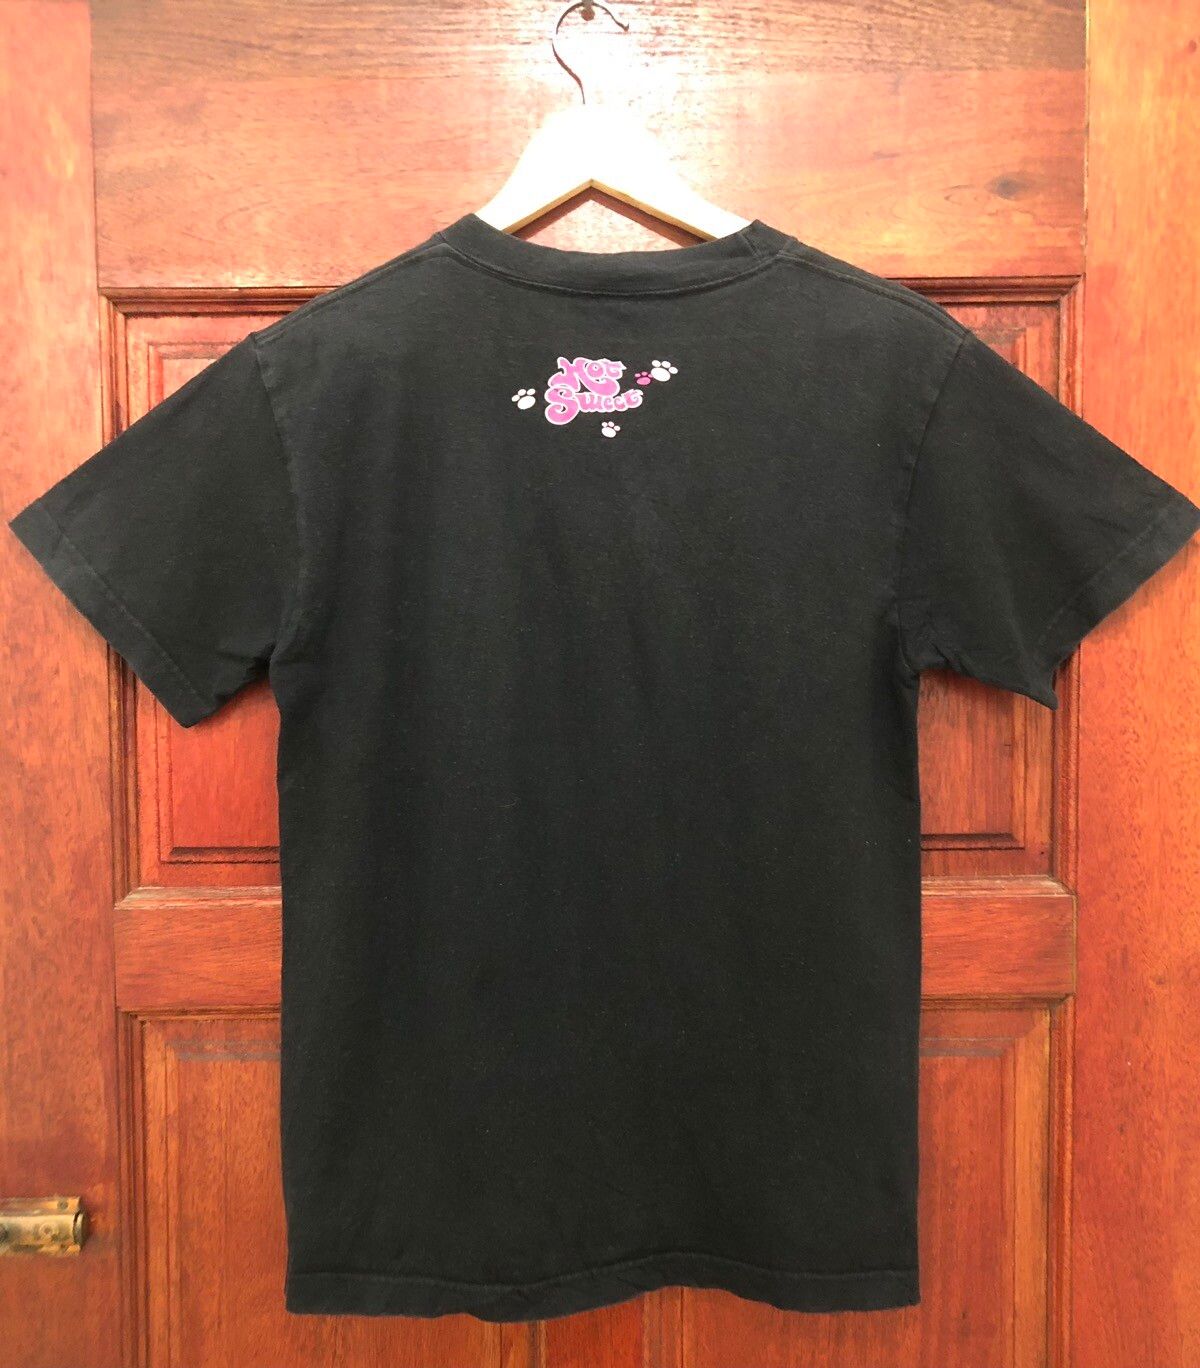 Japanese Brand Vintage Pink Panther Hot Sweet Japan Made TShirt Size US S / EU 44-46 / 1 - 2 Preview